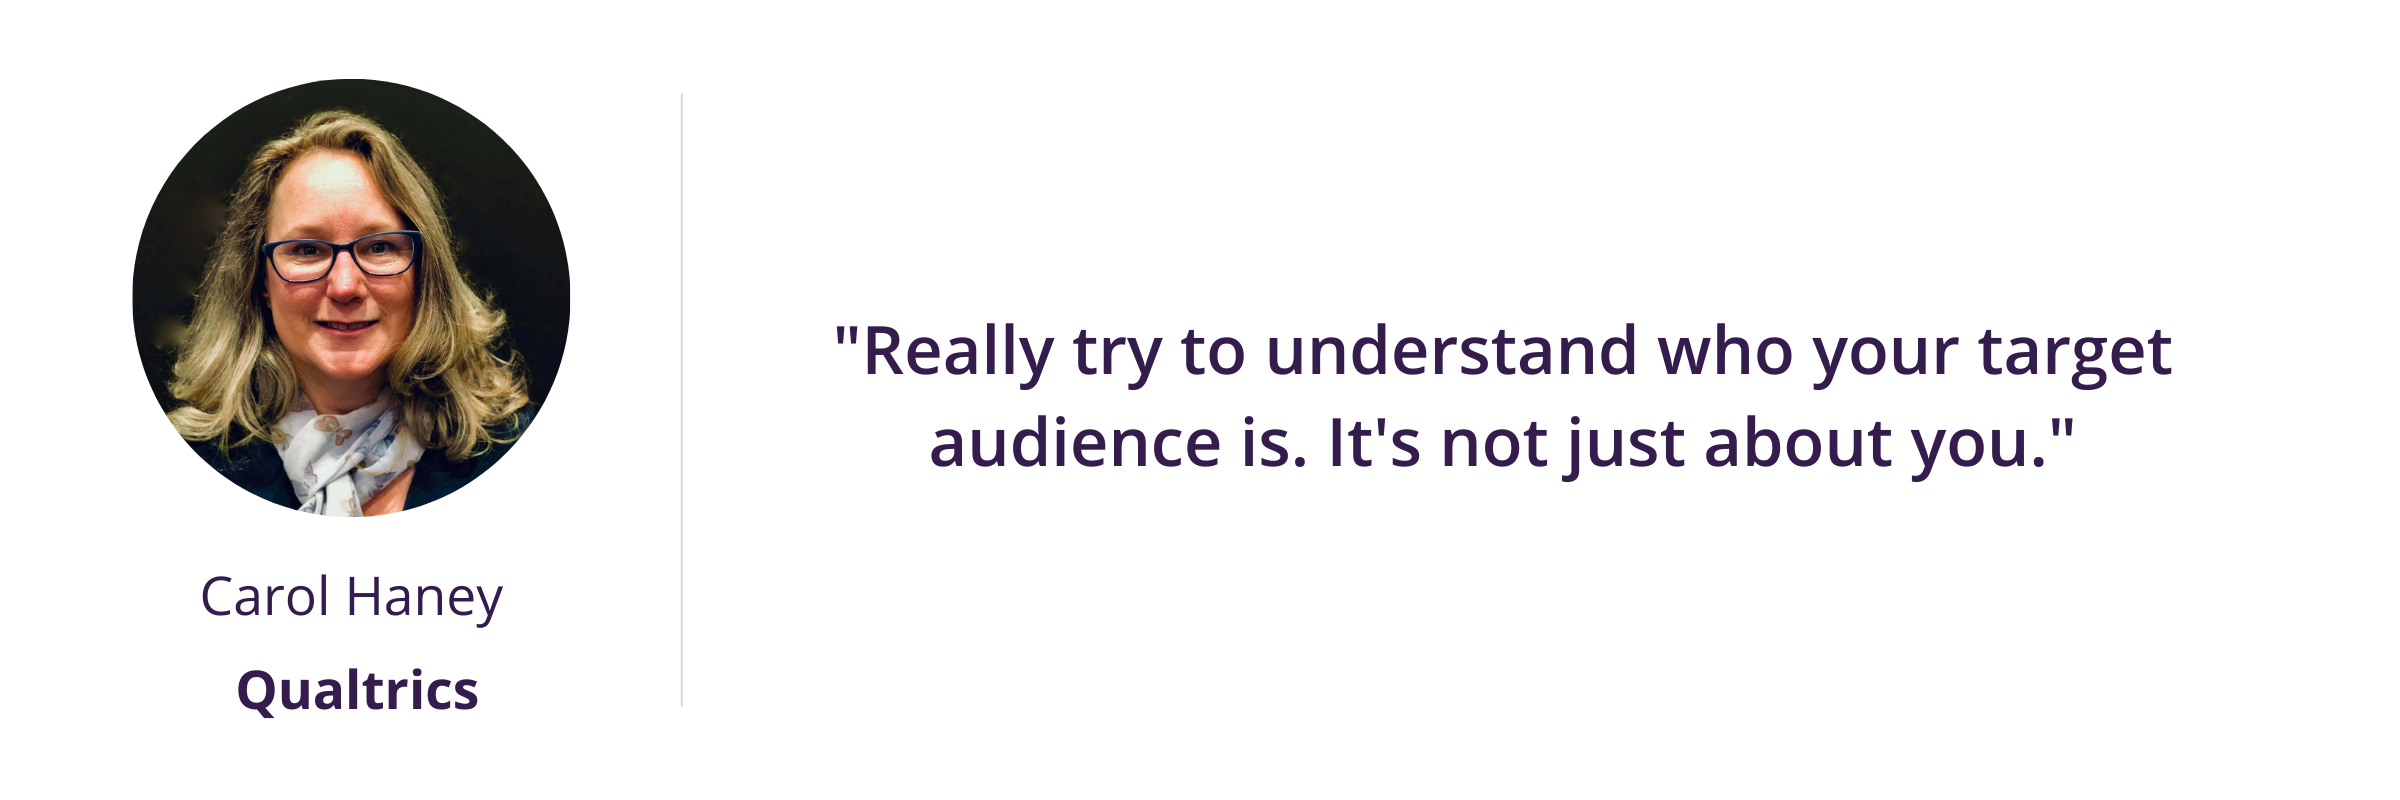 "Really try to understand who your target audience is. It's not just about you."